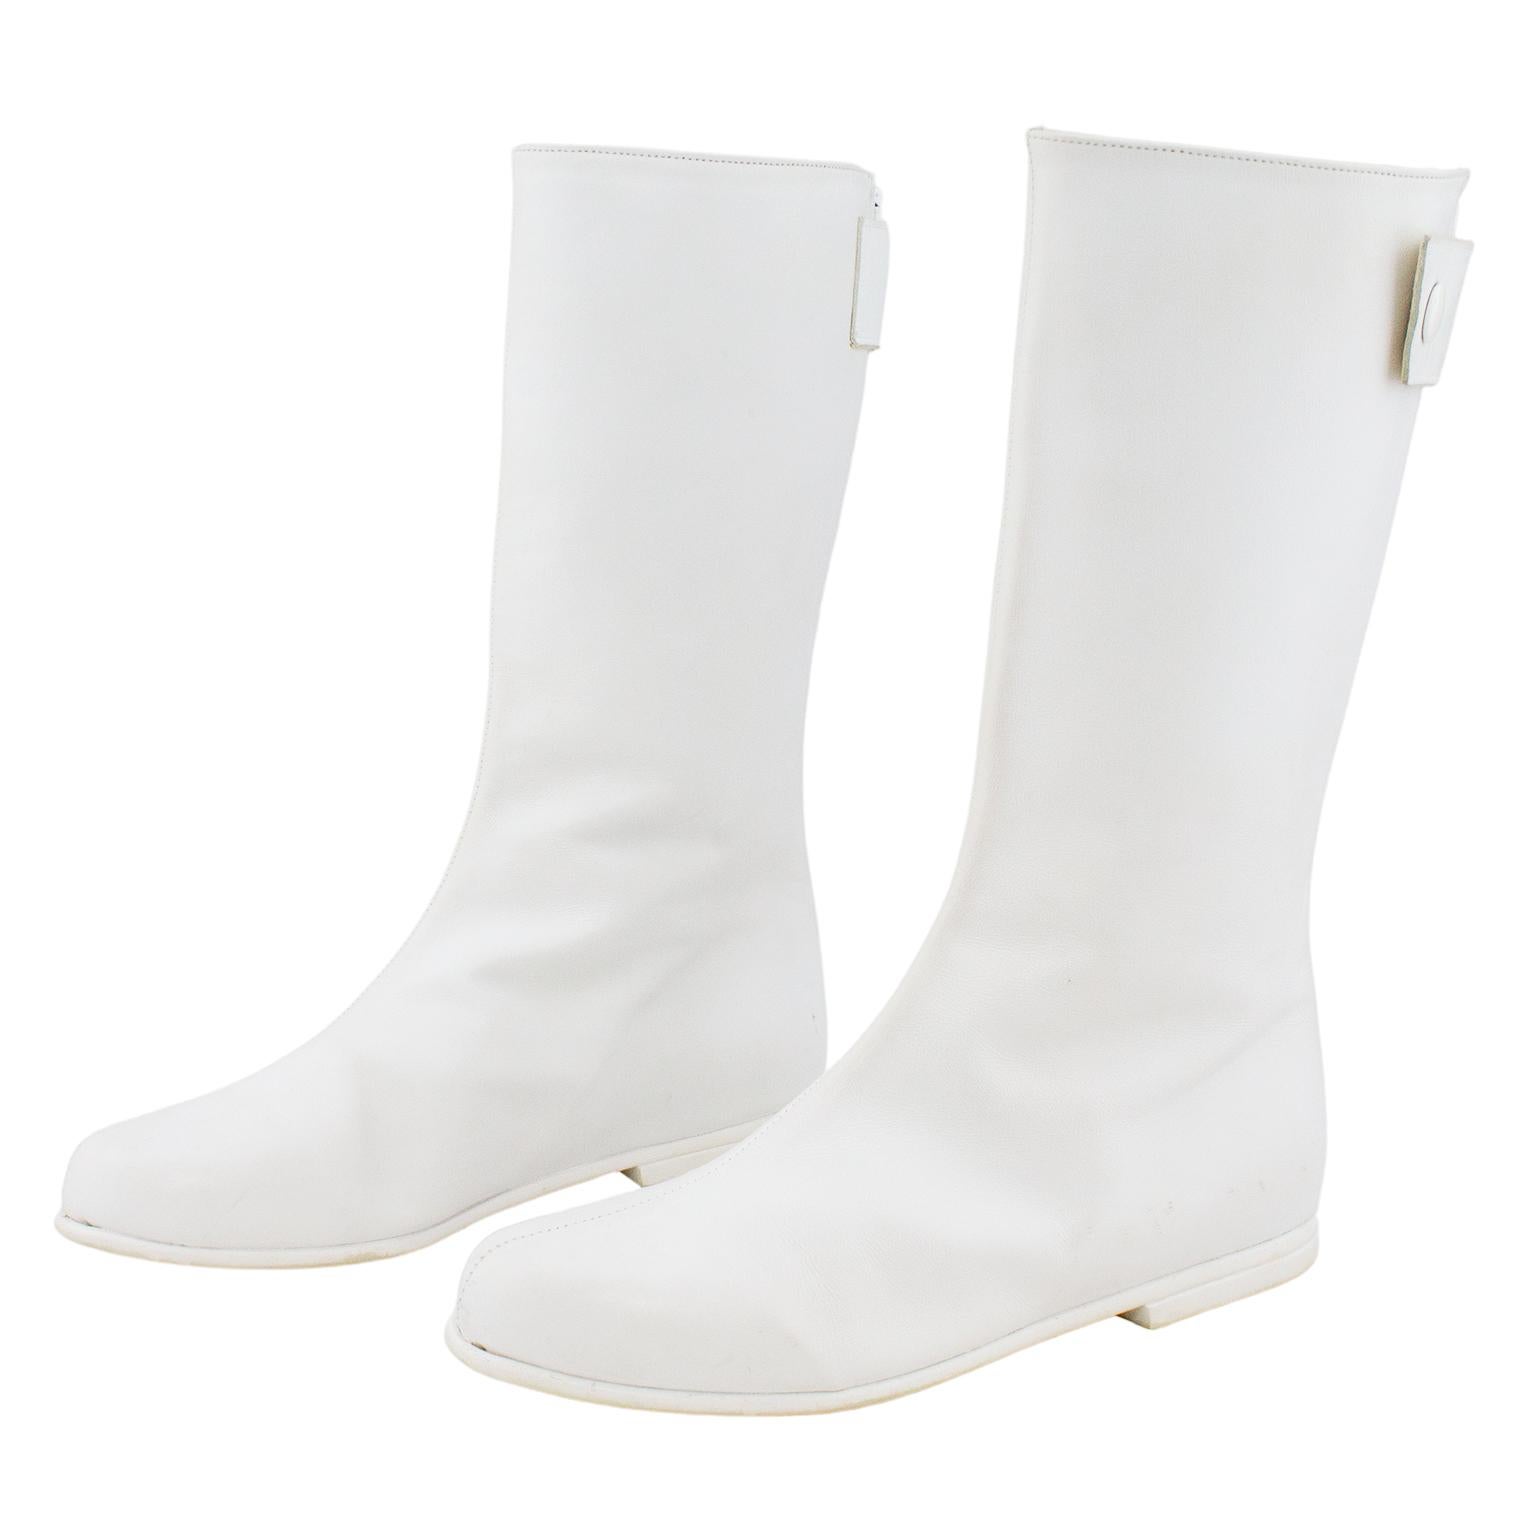 An updated 1990s version of the iconic 1960's Courreges white space boots. White leather with a centre seam, round toe, very small stacked heel and zipper up centre back with a snap button flap. At 11.5